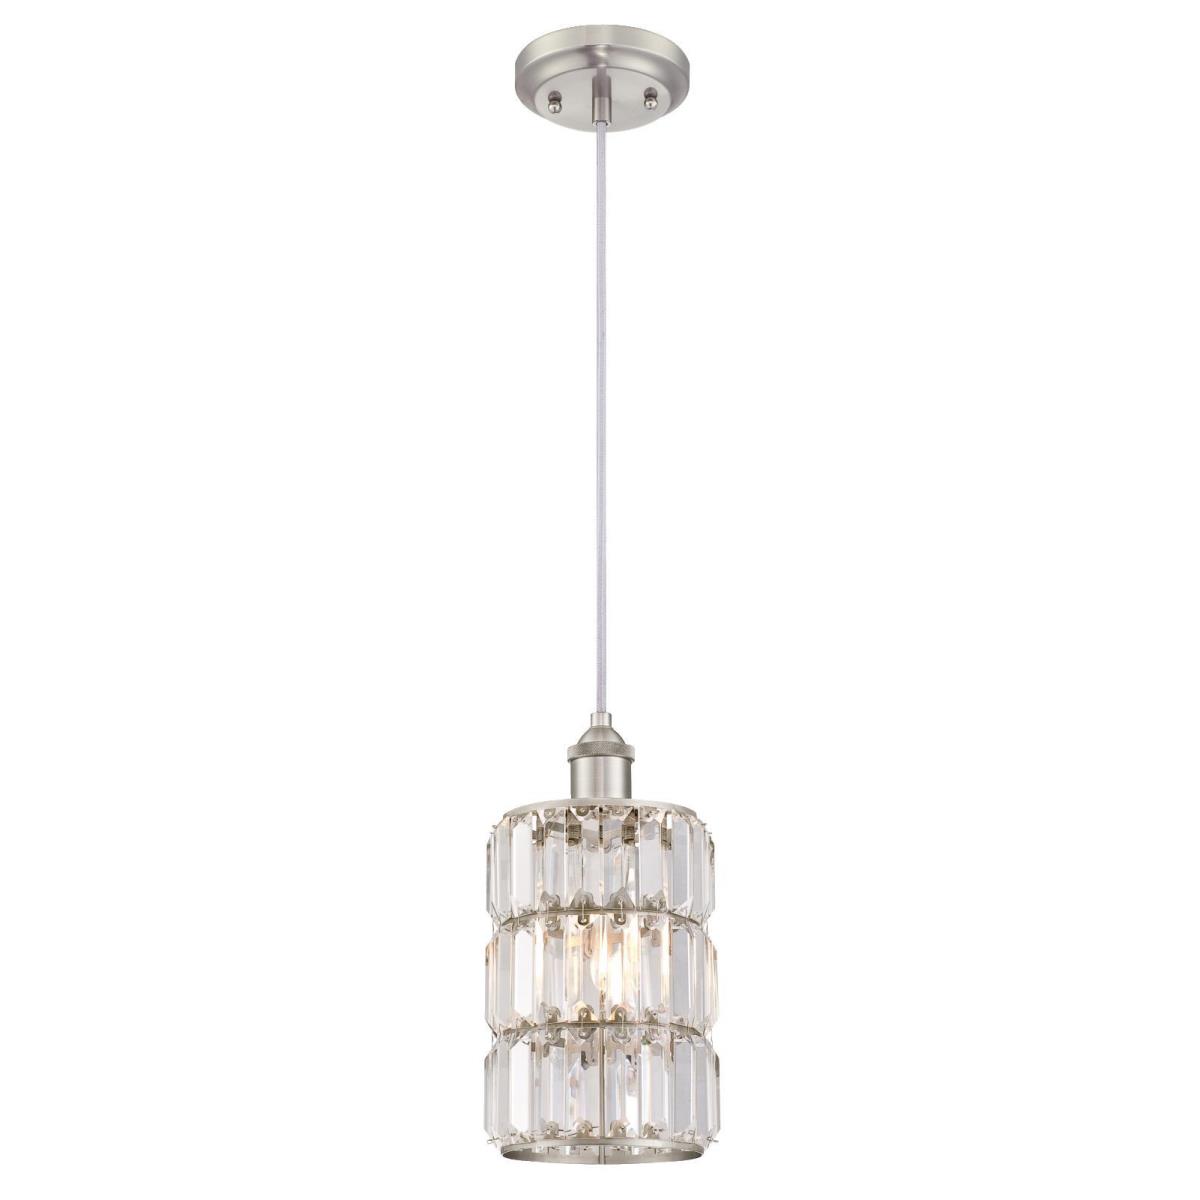 1 Light Mini Pendant Brushed Nickel Finish with Crystal Prism Glass